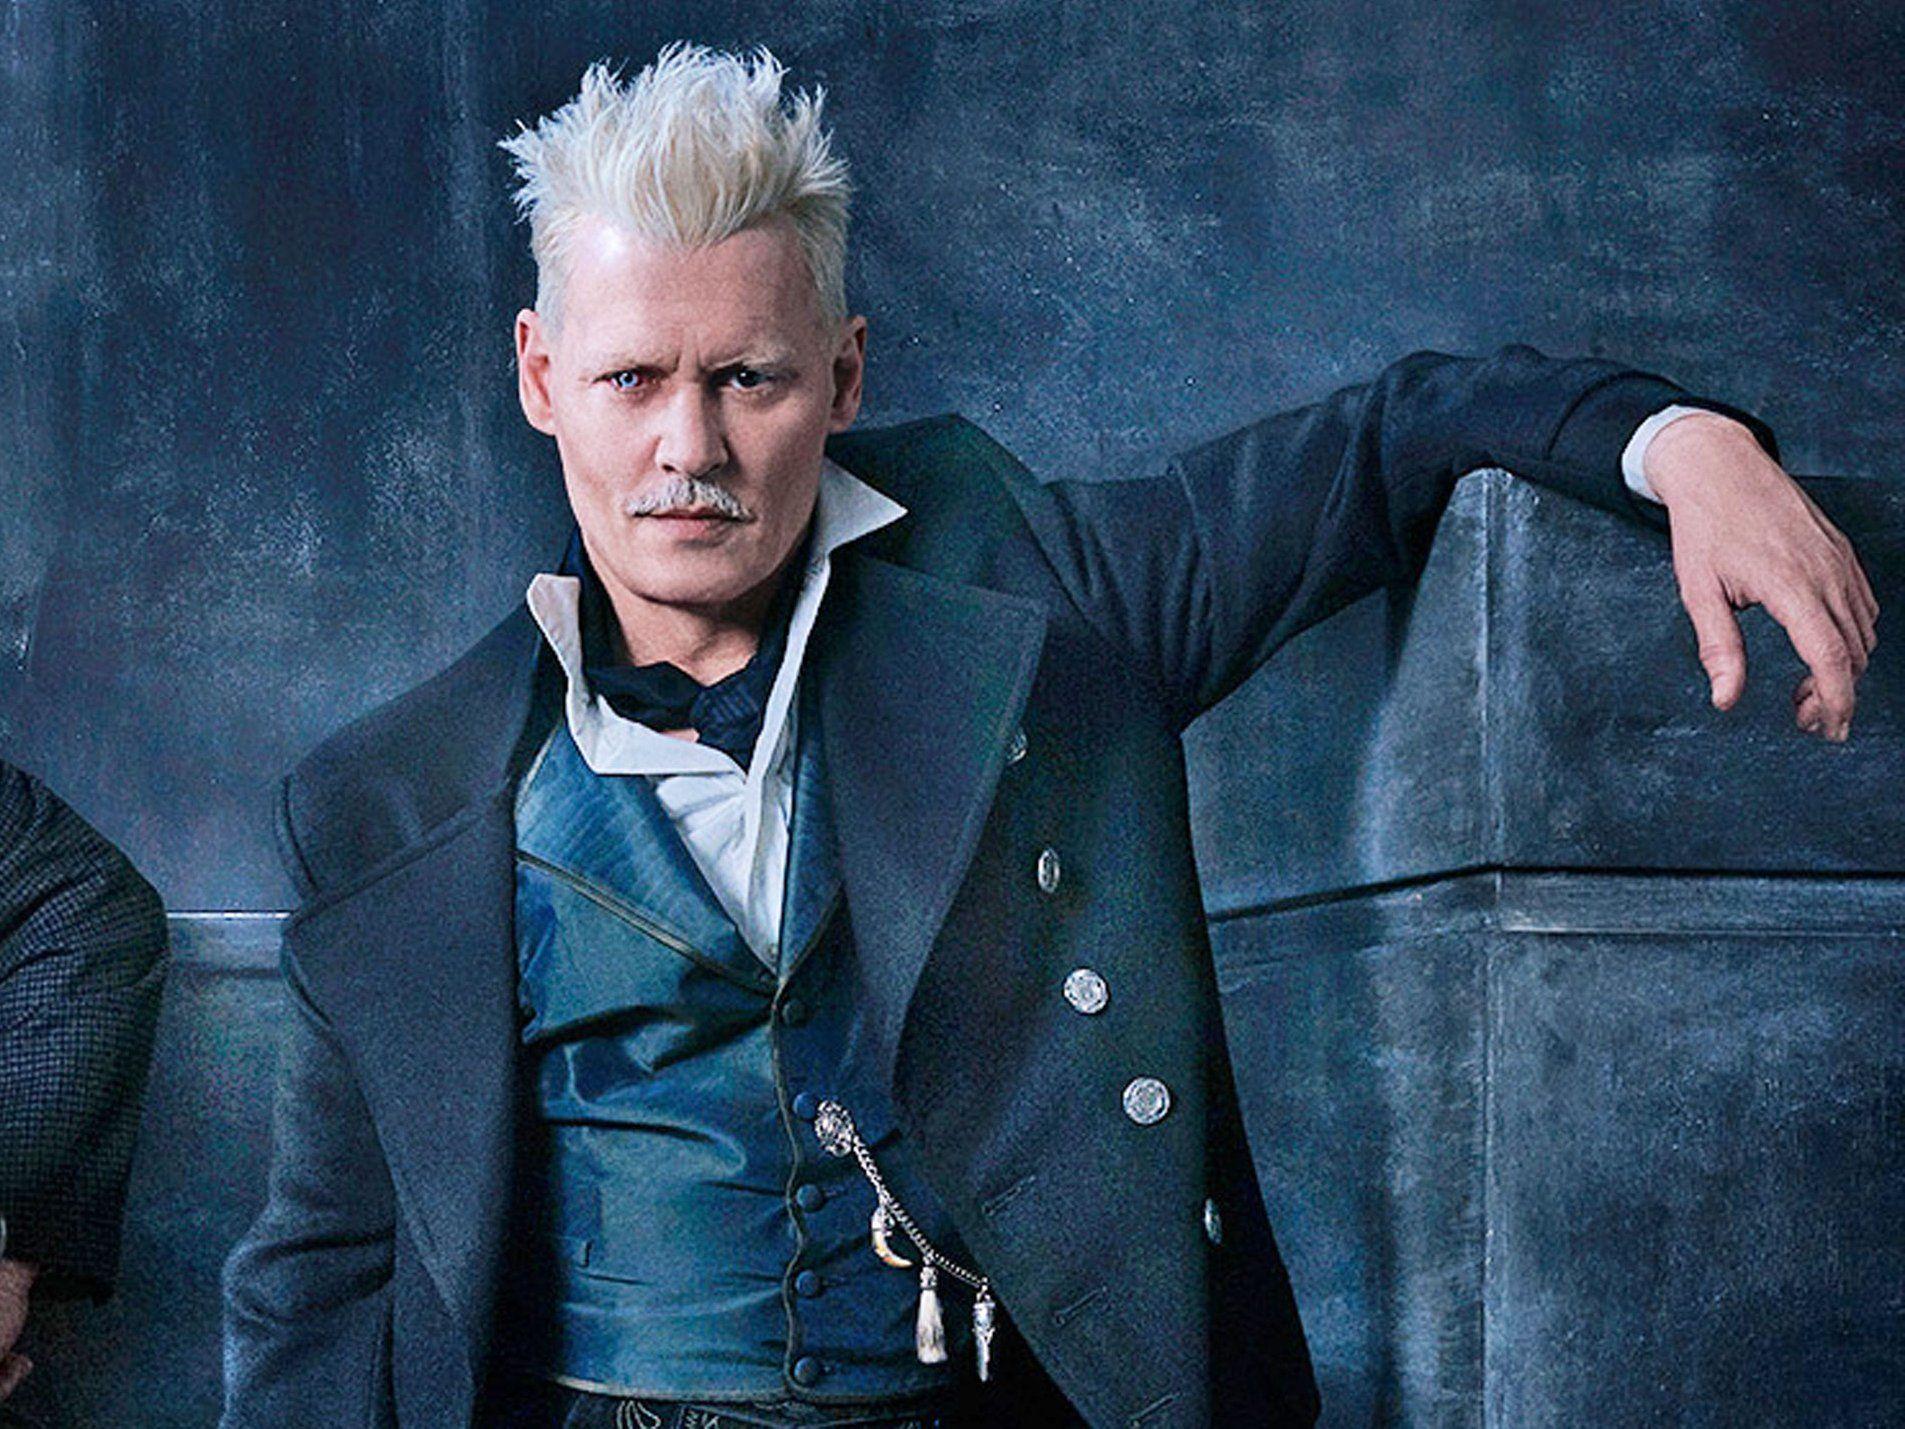 Fantastic Beasts: The Crimes of Grindelwald' trailer looks magical